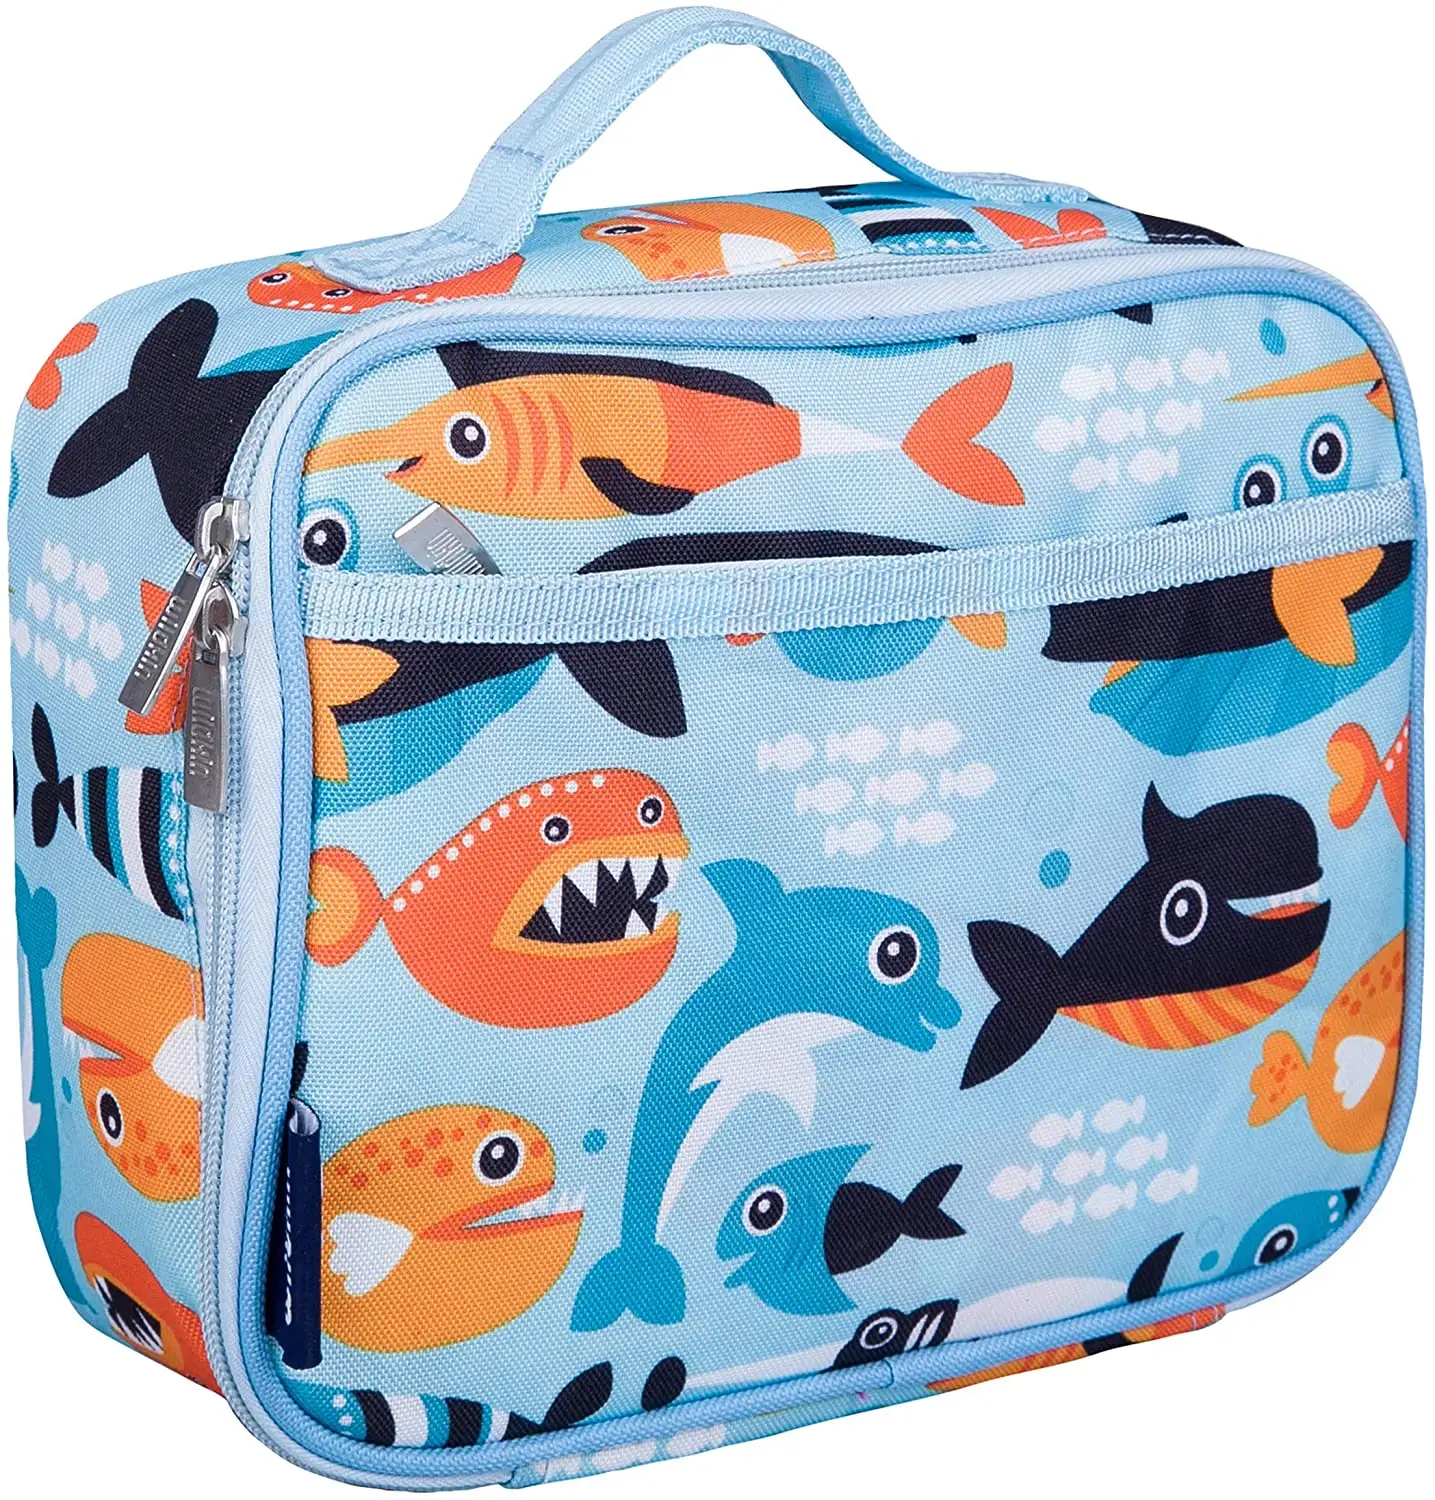 BSCI factory Kids Insulated Lunch Box Bag for Boys and Girls